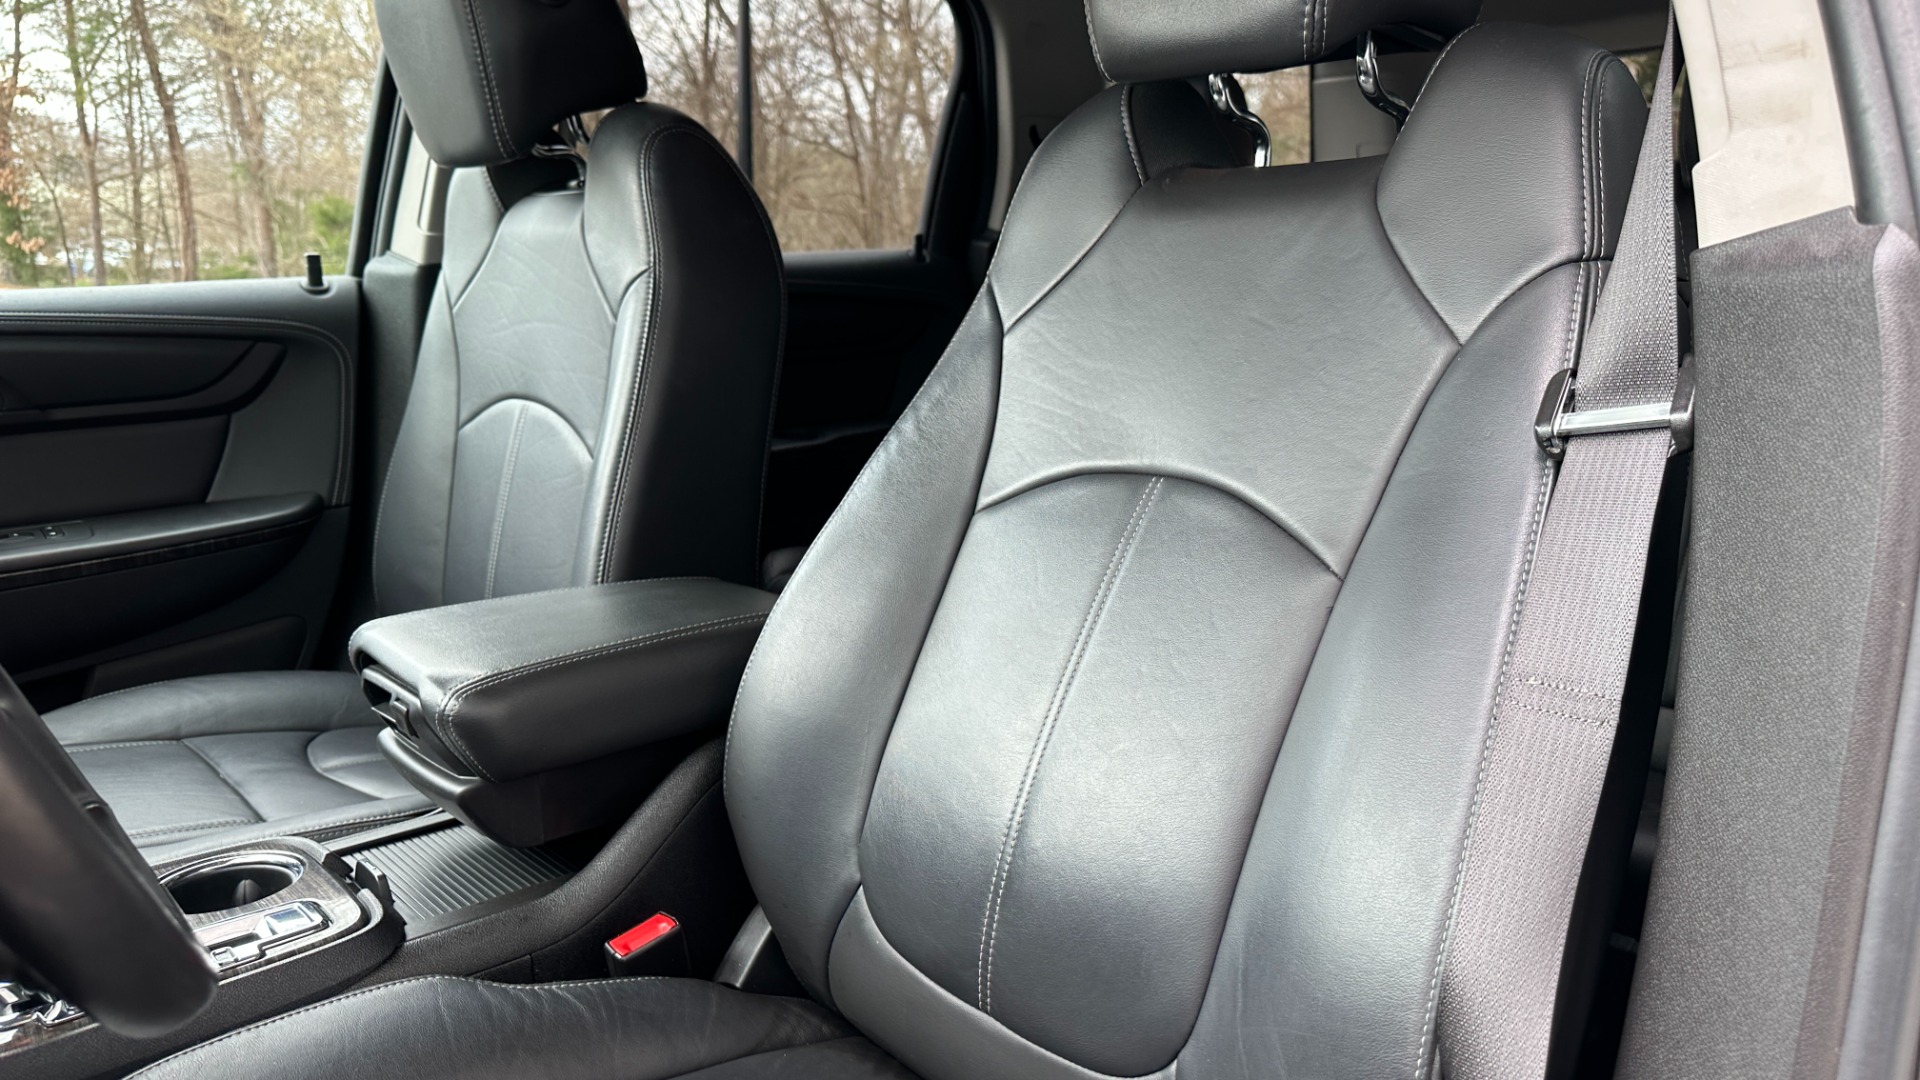 Used 2017 GMC Acadia Limited LIMITED / LEATHER / AWD / CAPTAIN CHAIRS / 3RD ROW SEATING for sale Sold at Formula Imports in Charlotte NC 28227 11